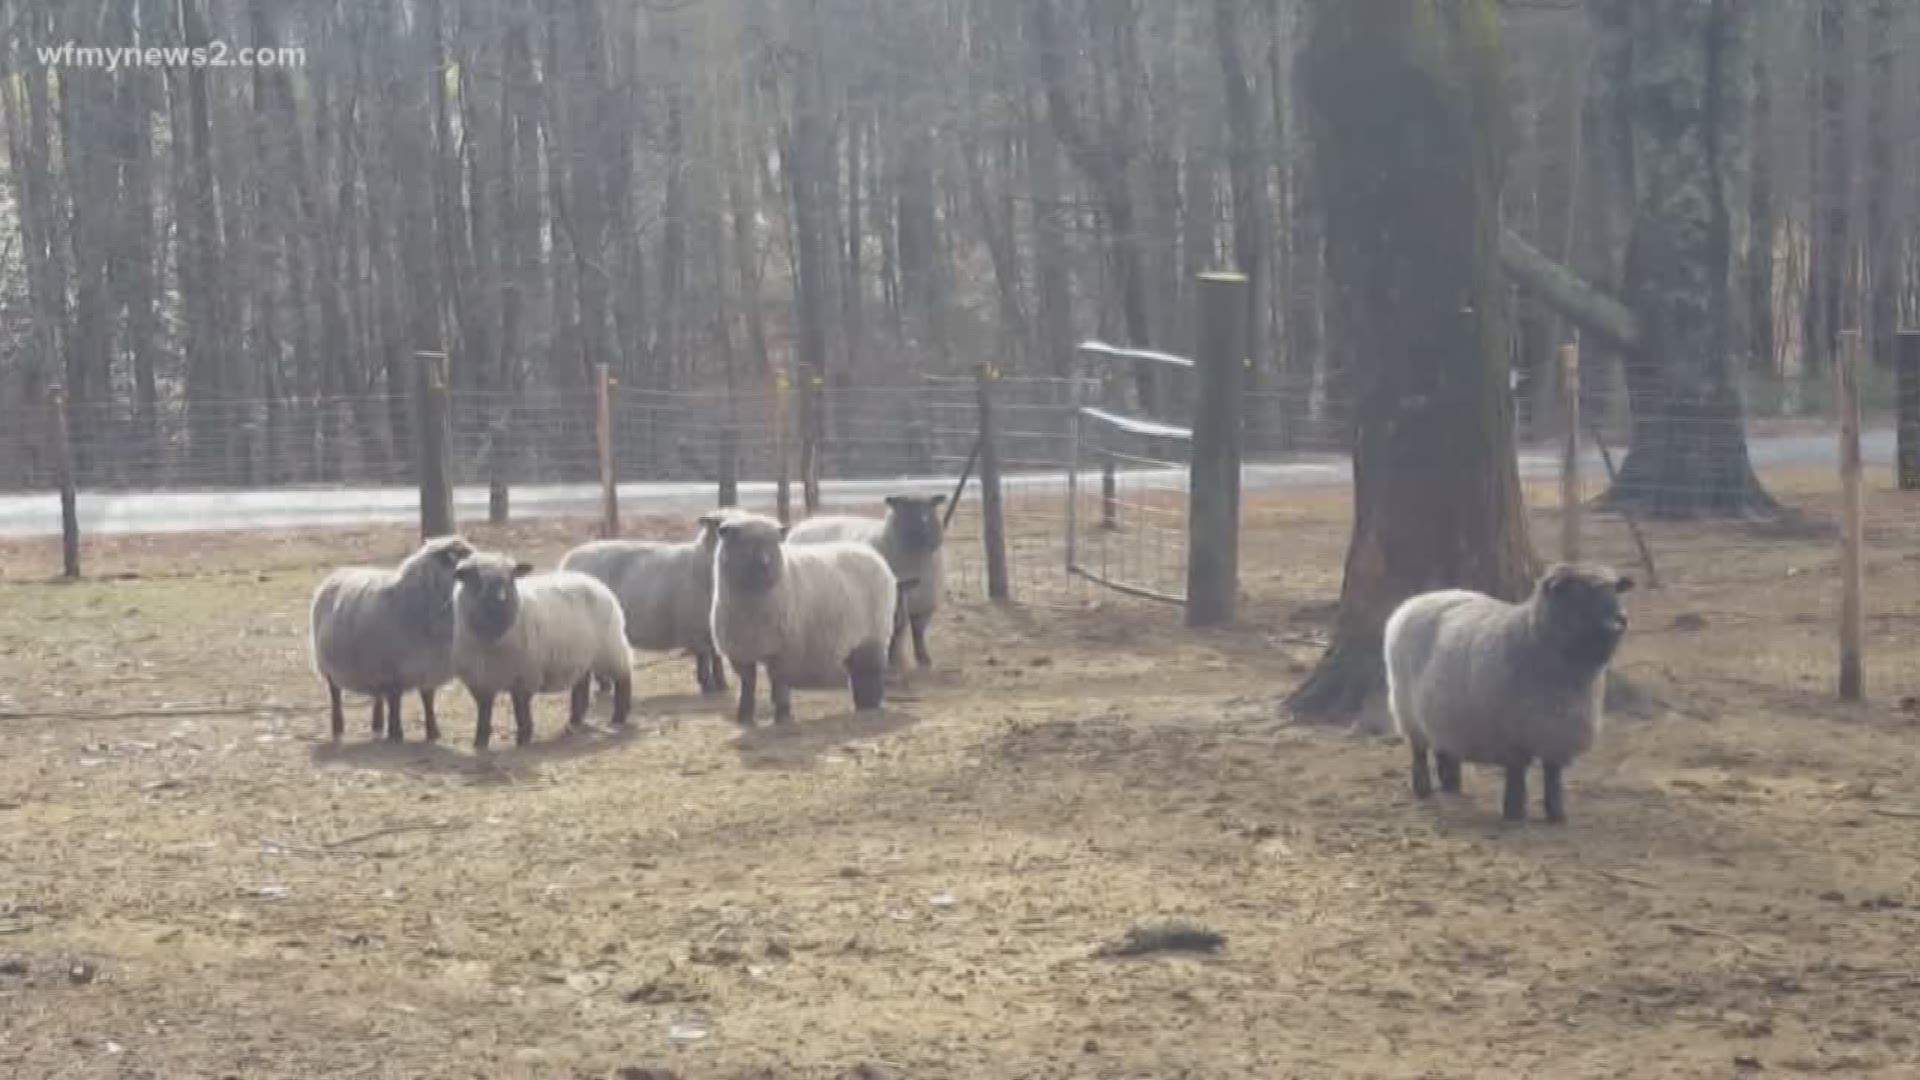 The family hired American Custom Carports out of Mt. Airy to build a barn for their animals. The family says the company never showed and skipped out with their deposit check.